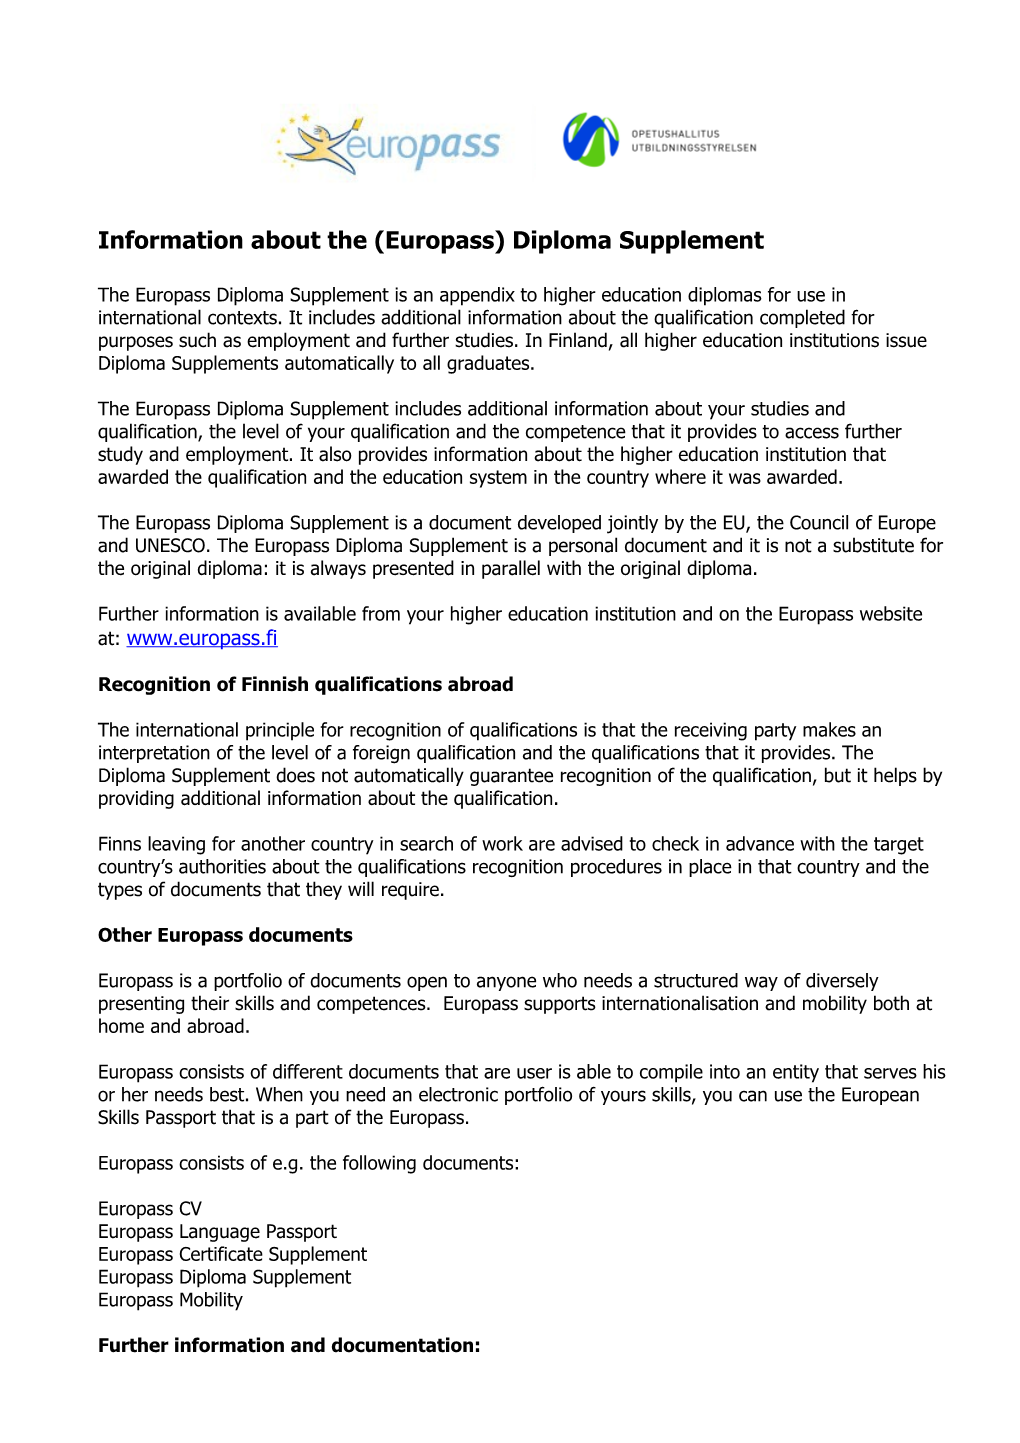 Information About the (Europass) Diploma Supplement